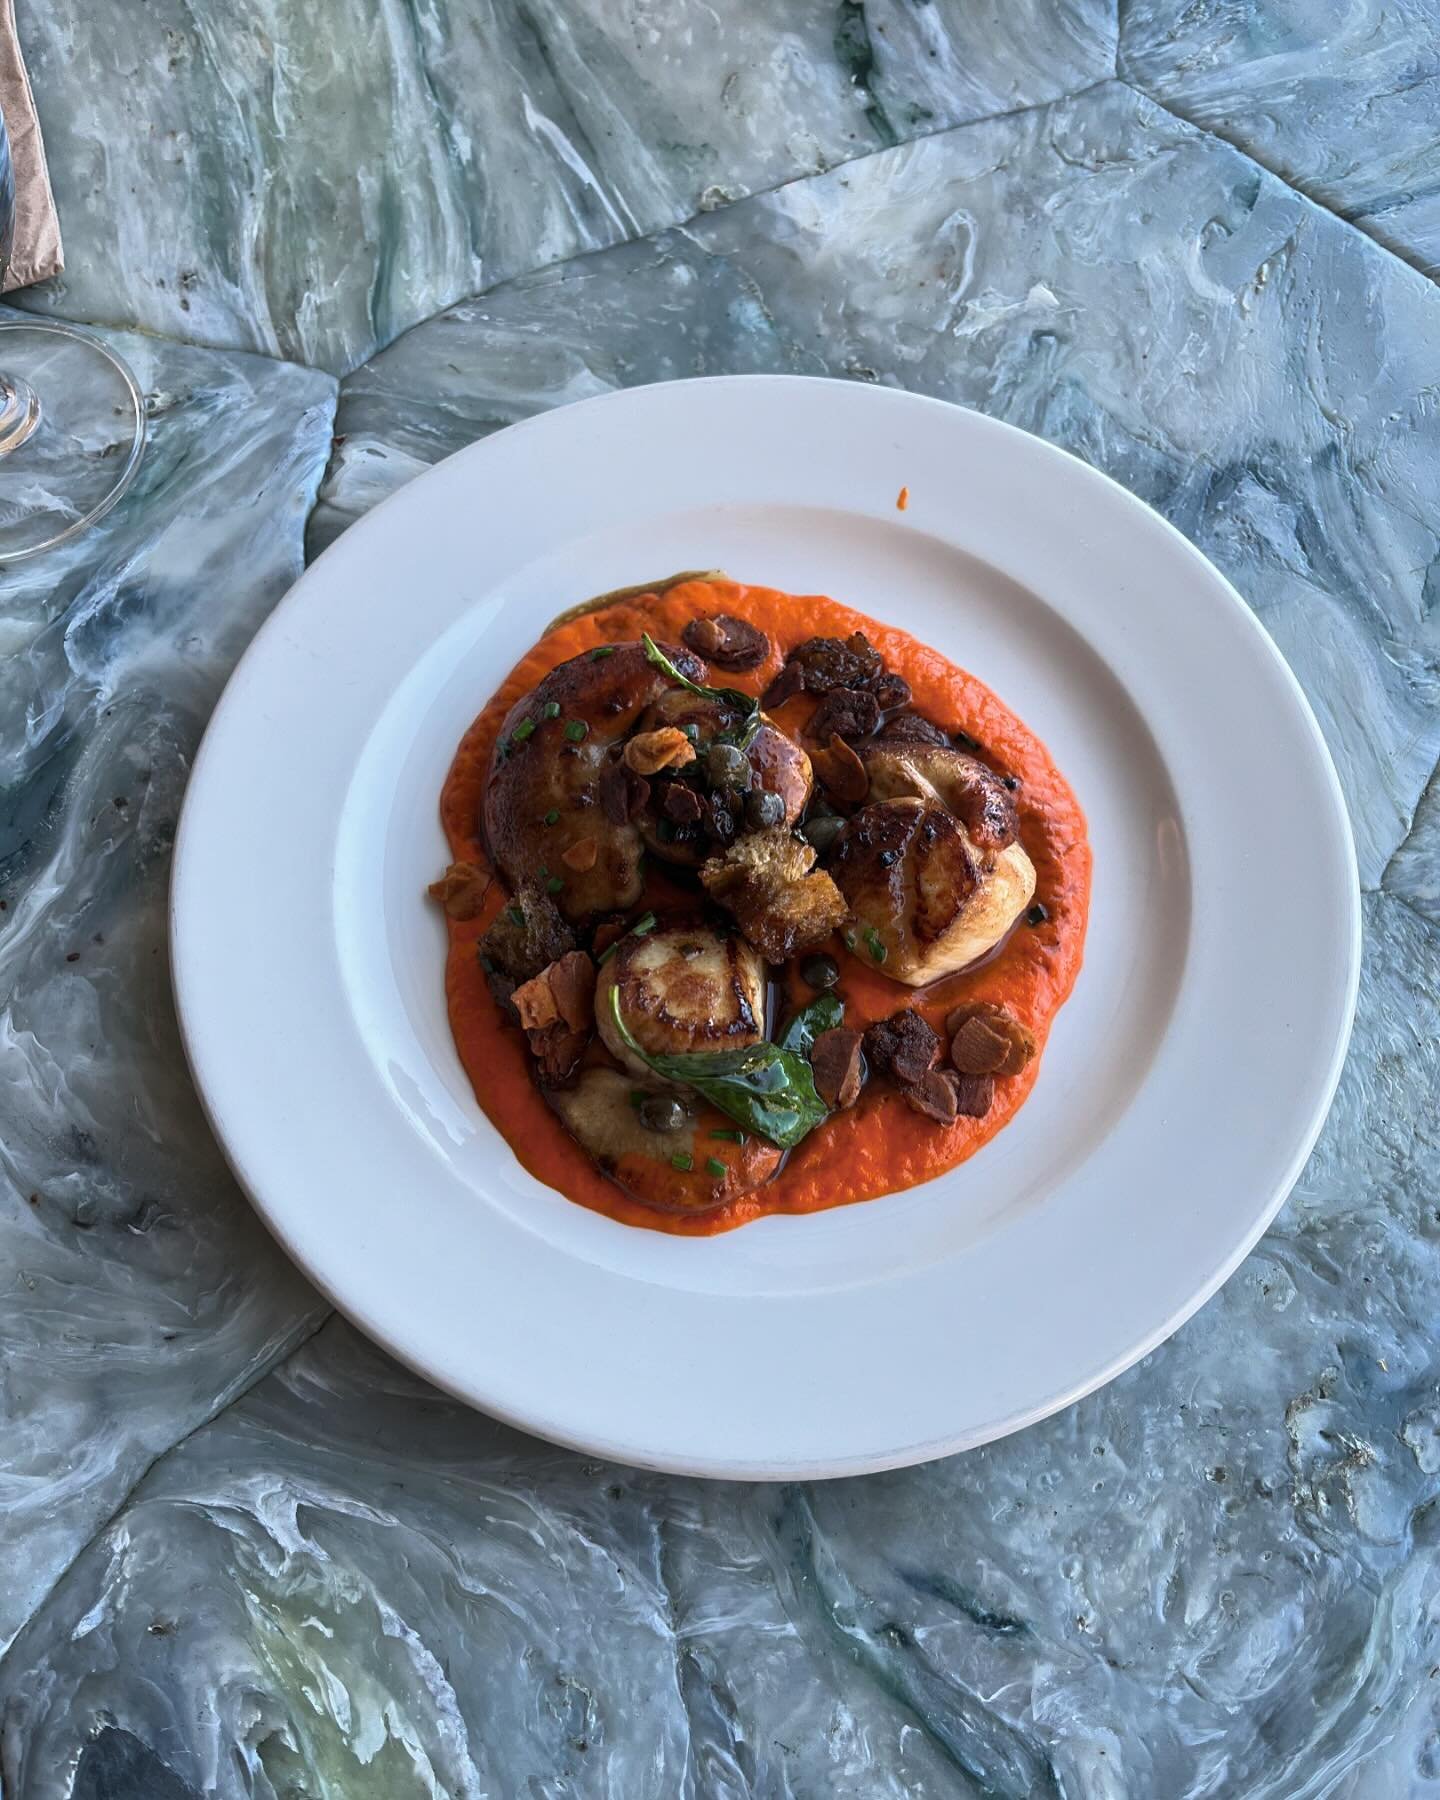 Scallops, red pepper and almonds. Summer is nearly here&hellip;